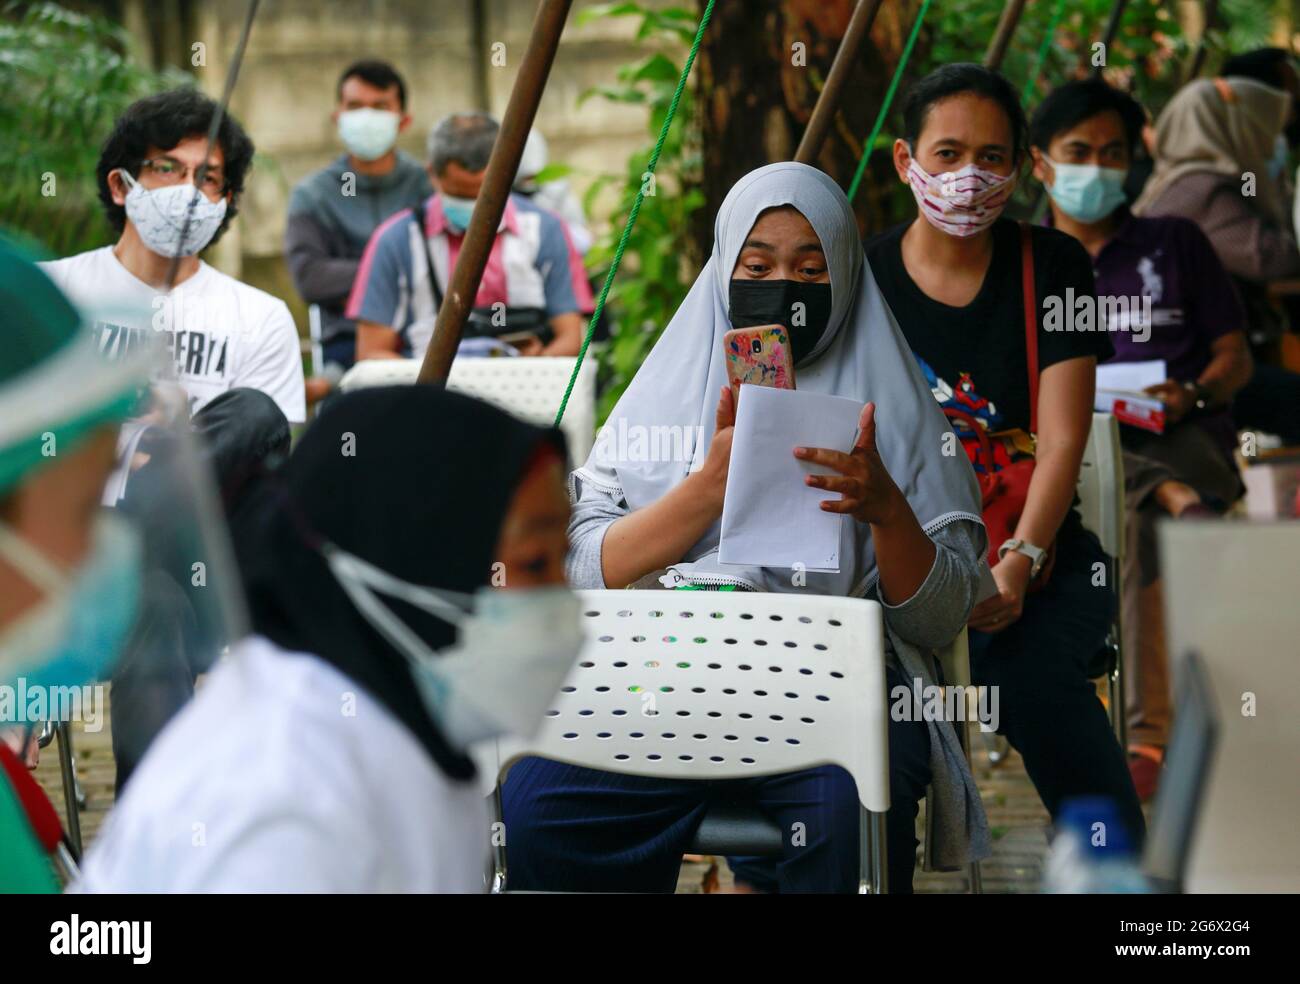 People wearing protective face masks queue up for the coronavirus disease (COVID-19) vaccine, as the Indonesia government speeds up its inoculation effort by deploying a mobile vaccine van, in Jakarta, Indonesia, July 8, 2021. Picture taken July 8, 2021. REUTERS/Ajeng Dinar Ulfiana Stock Photo